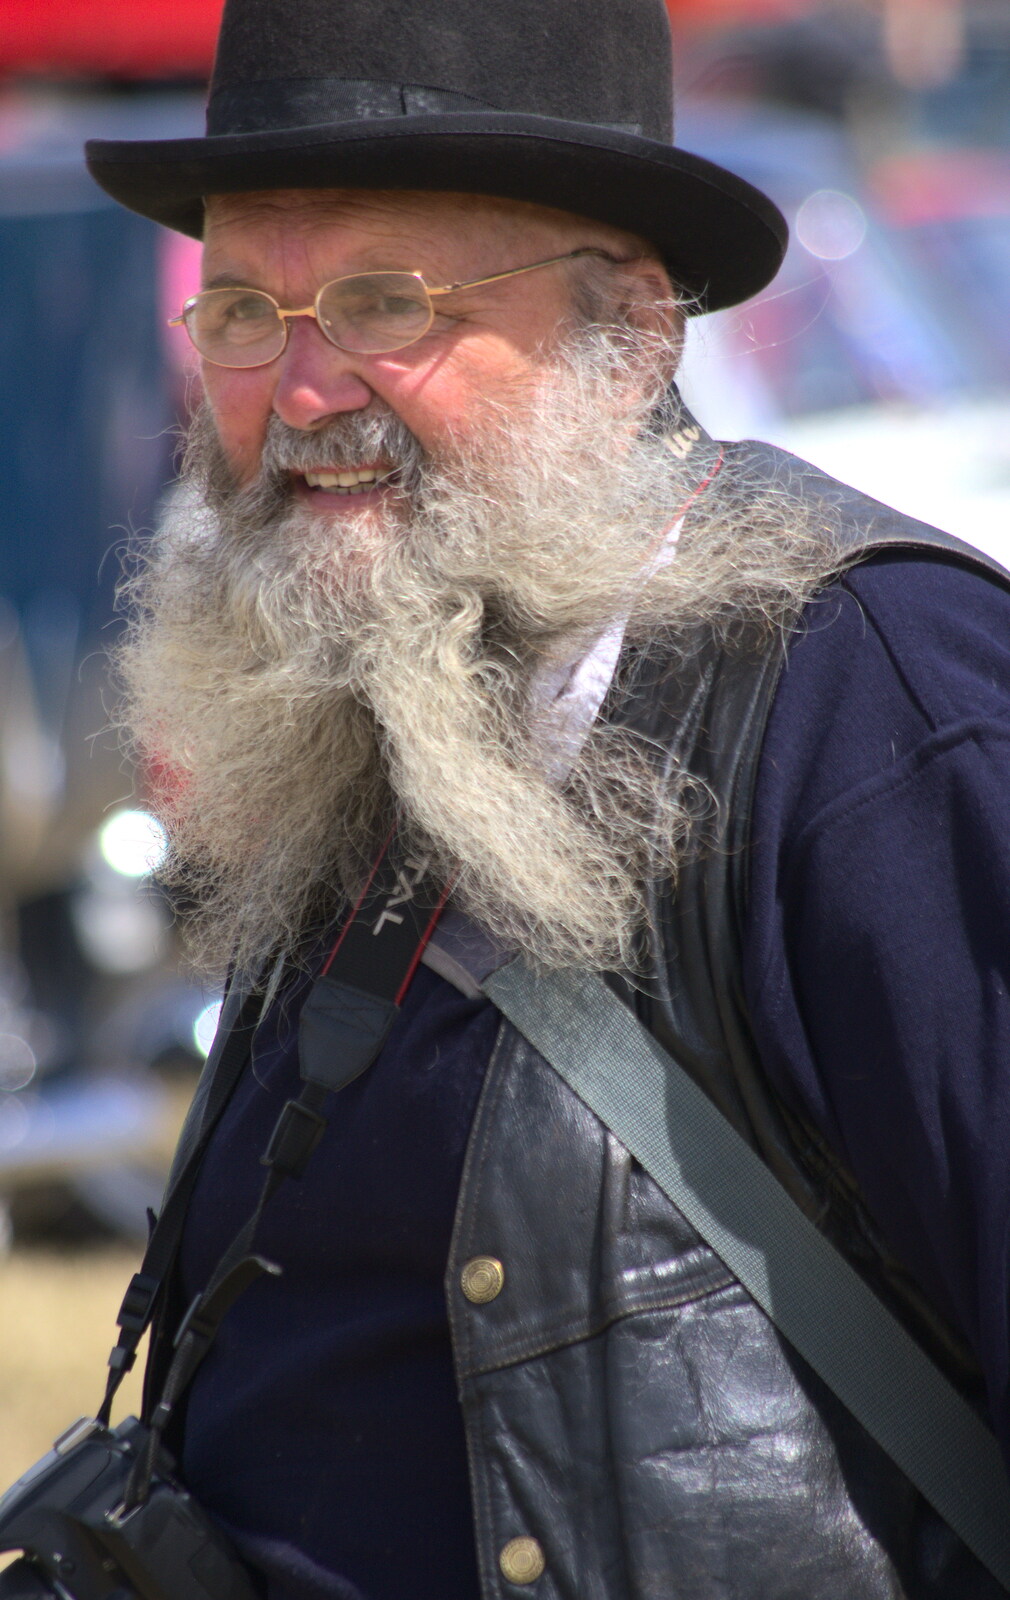 A geezer with a fantastic beard from A Vintage Tractorey Sort of Day, Palgrave, Suffolk - 21st June 2015